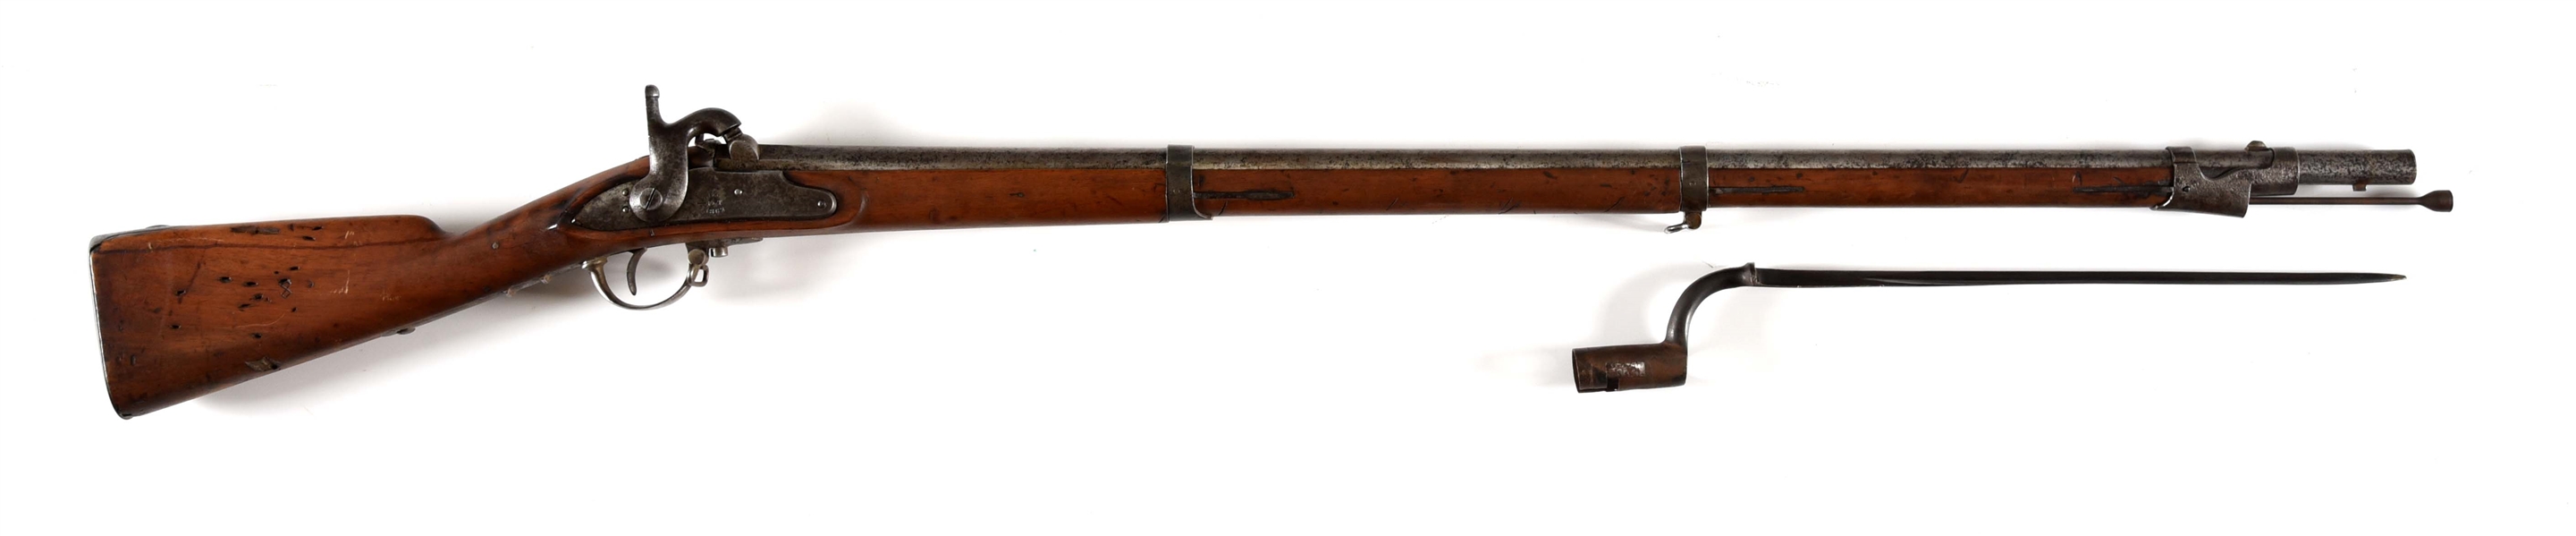 (A) 1862 BELGIAN PERCUSSION RIFLED MUSKET.